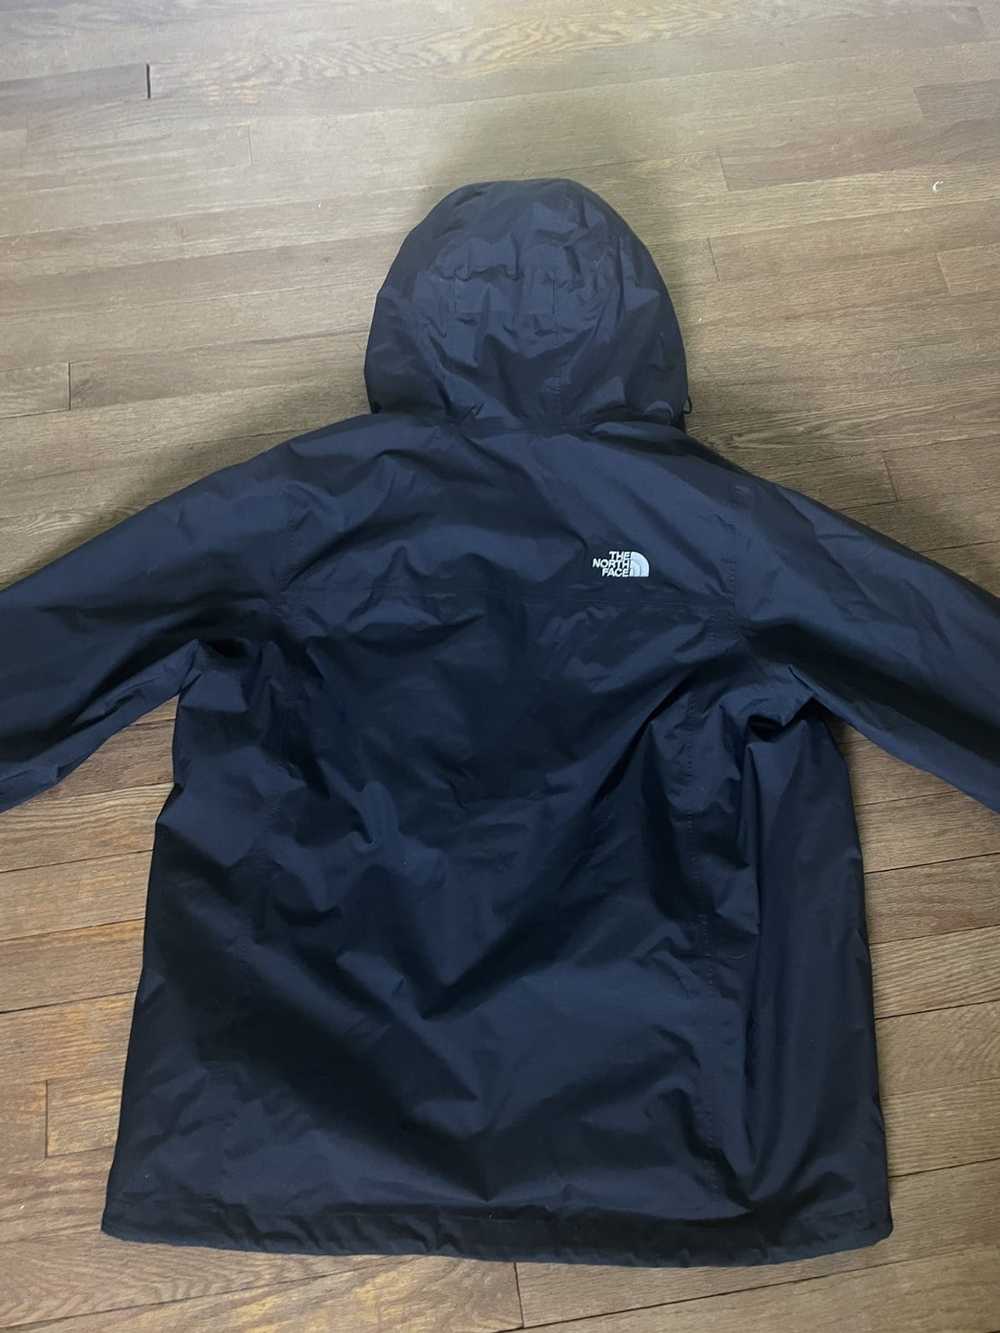 The North Face Vintage North Face Jacket - image 3